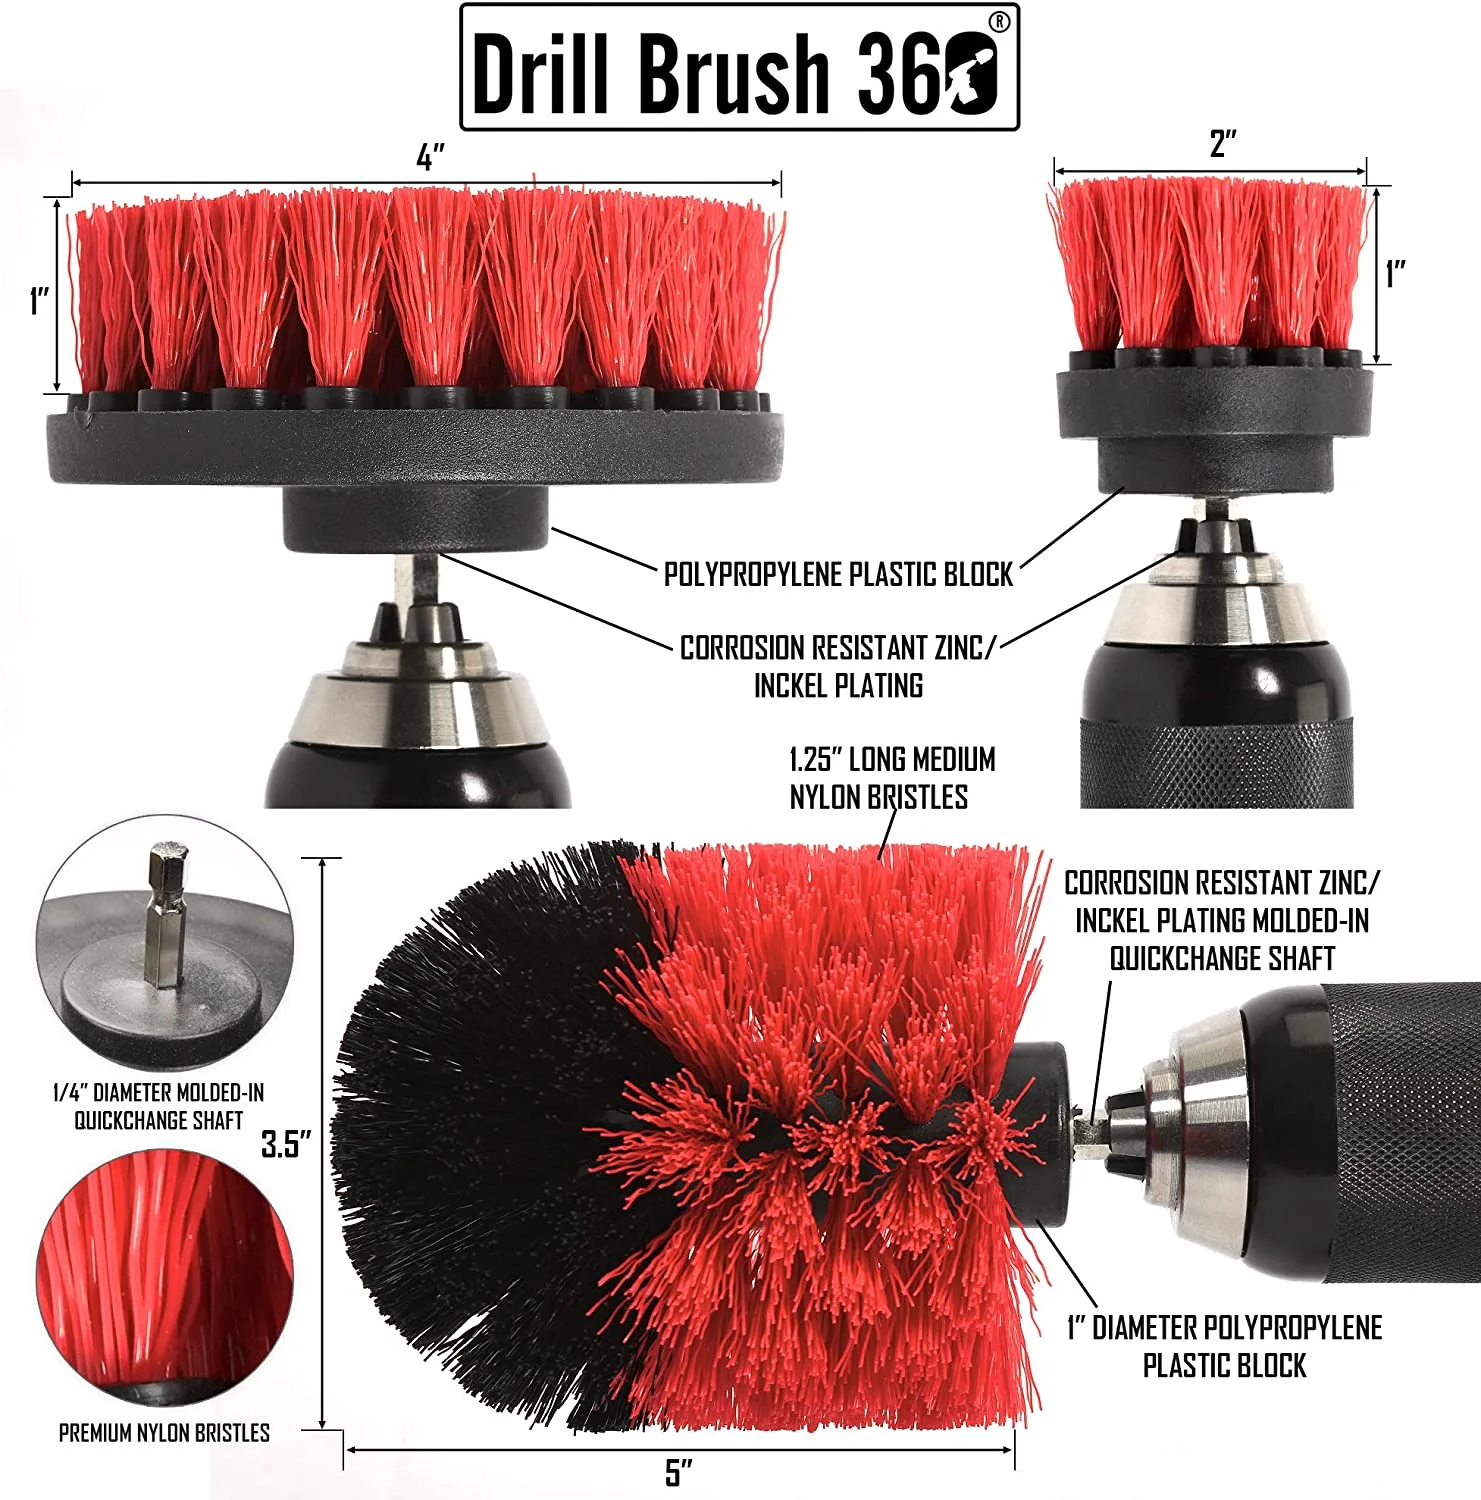 Original Drill Brush 360 Attachments 3 Pack kit Medium- Yellow All Purpose Cleaner Scrubbing Brushes for Bathroom Surface, Grout, Tub, Shower, Kitchen, Auto,Boat,RV